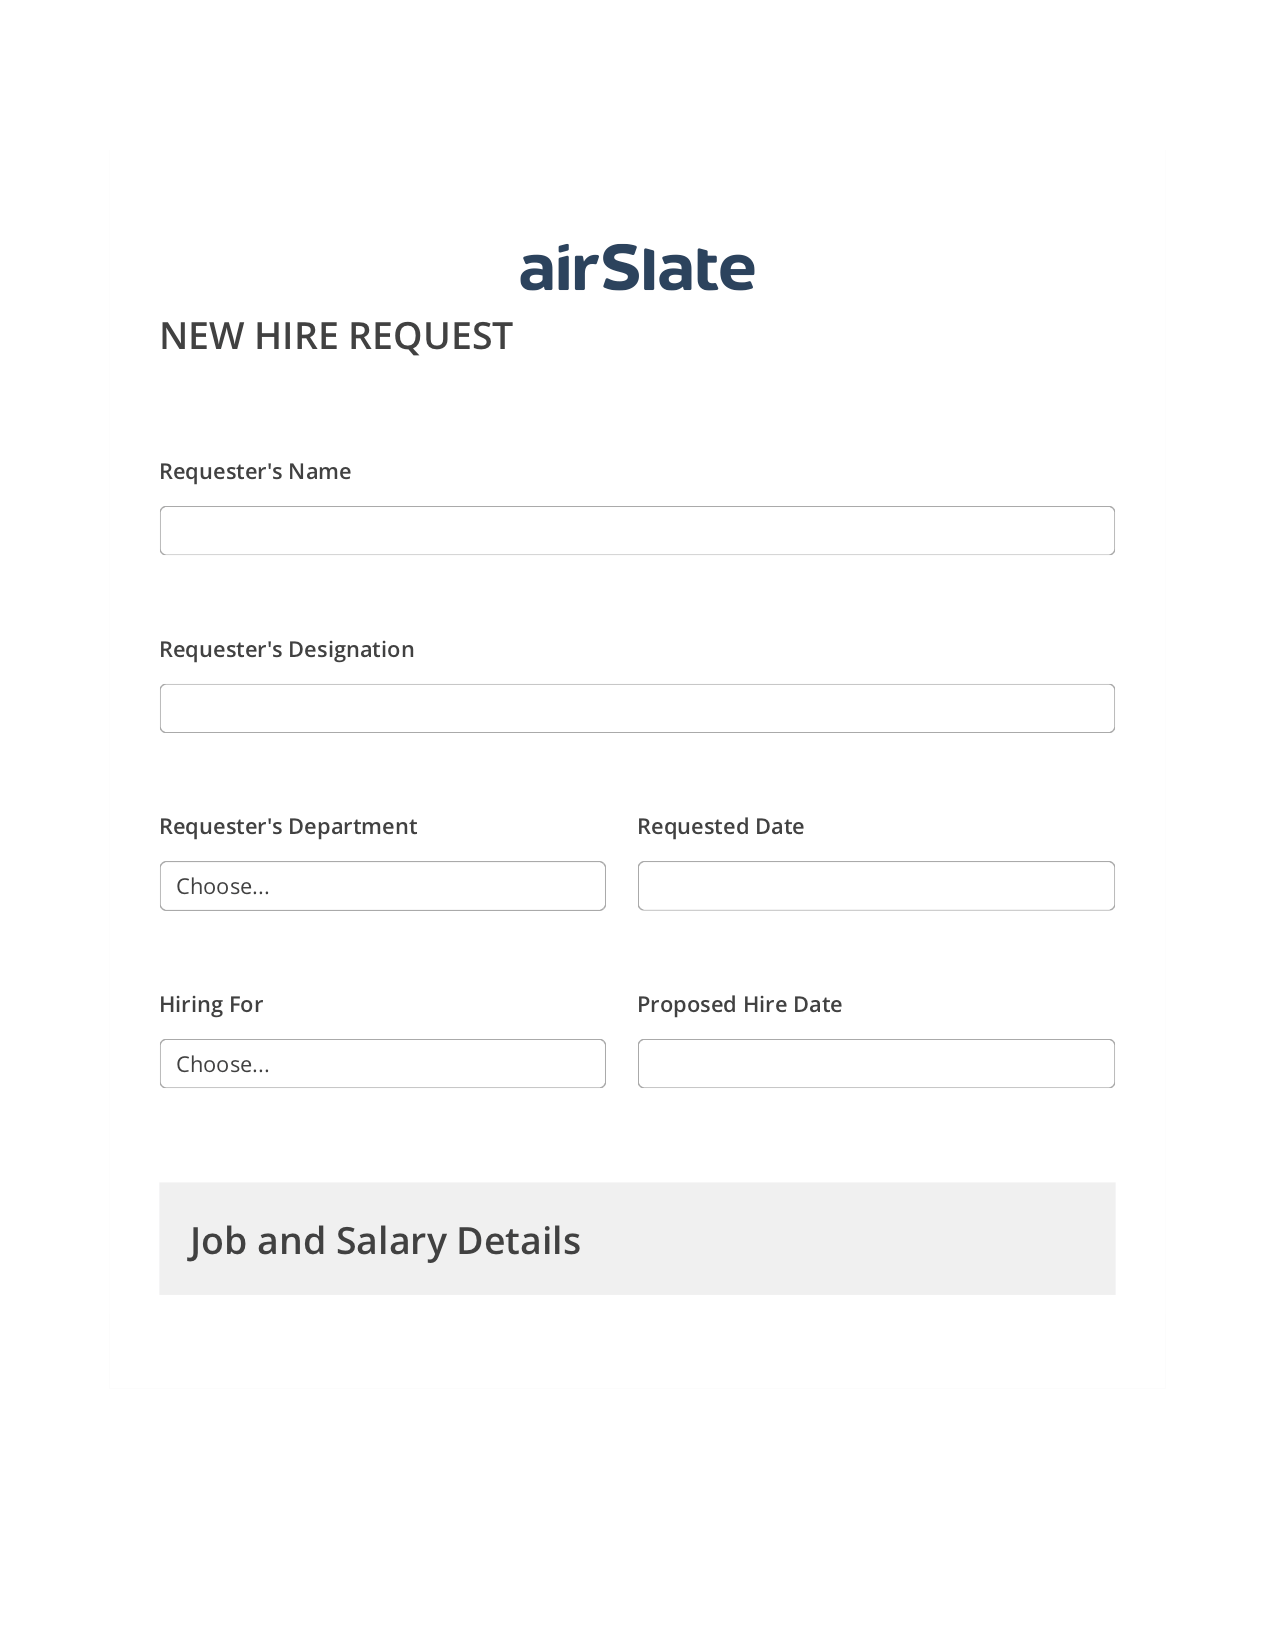 Hiring Request Workflow Pre-fill from Salesforce Records Bot, Invoke Salesforce Process Bot, Export to Smartsheet